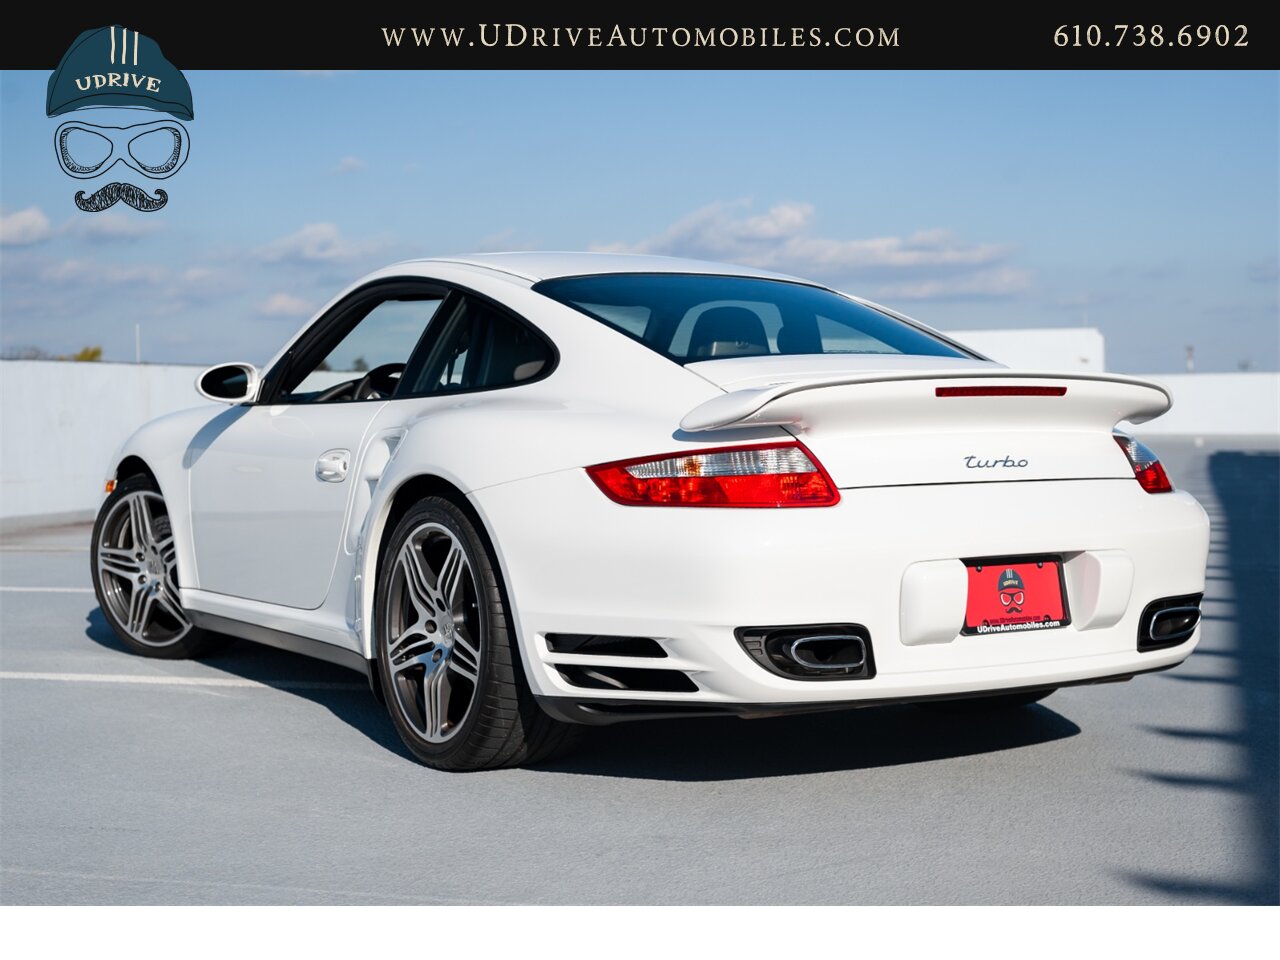 2007 Porsche 911 Turbo 642 Miles 1 Owner Carrara White 997  Sport Chrono Adaptive Sport Seats All Documentation from New - Photo 6 - West Chester, PA 19382